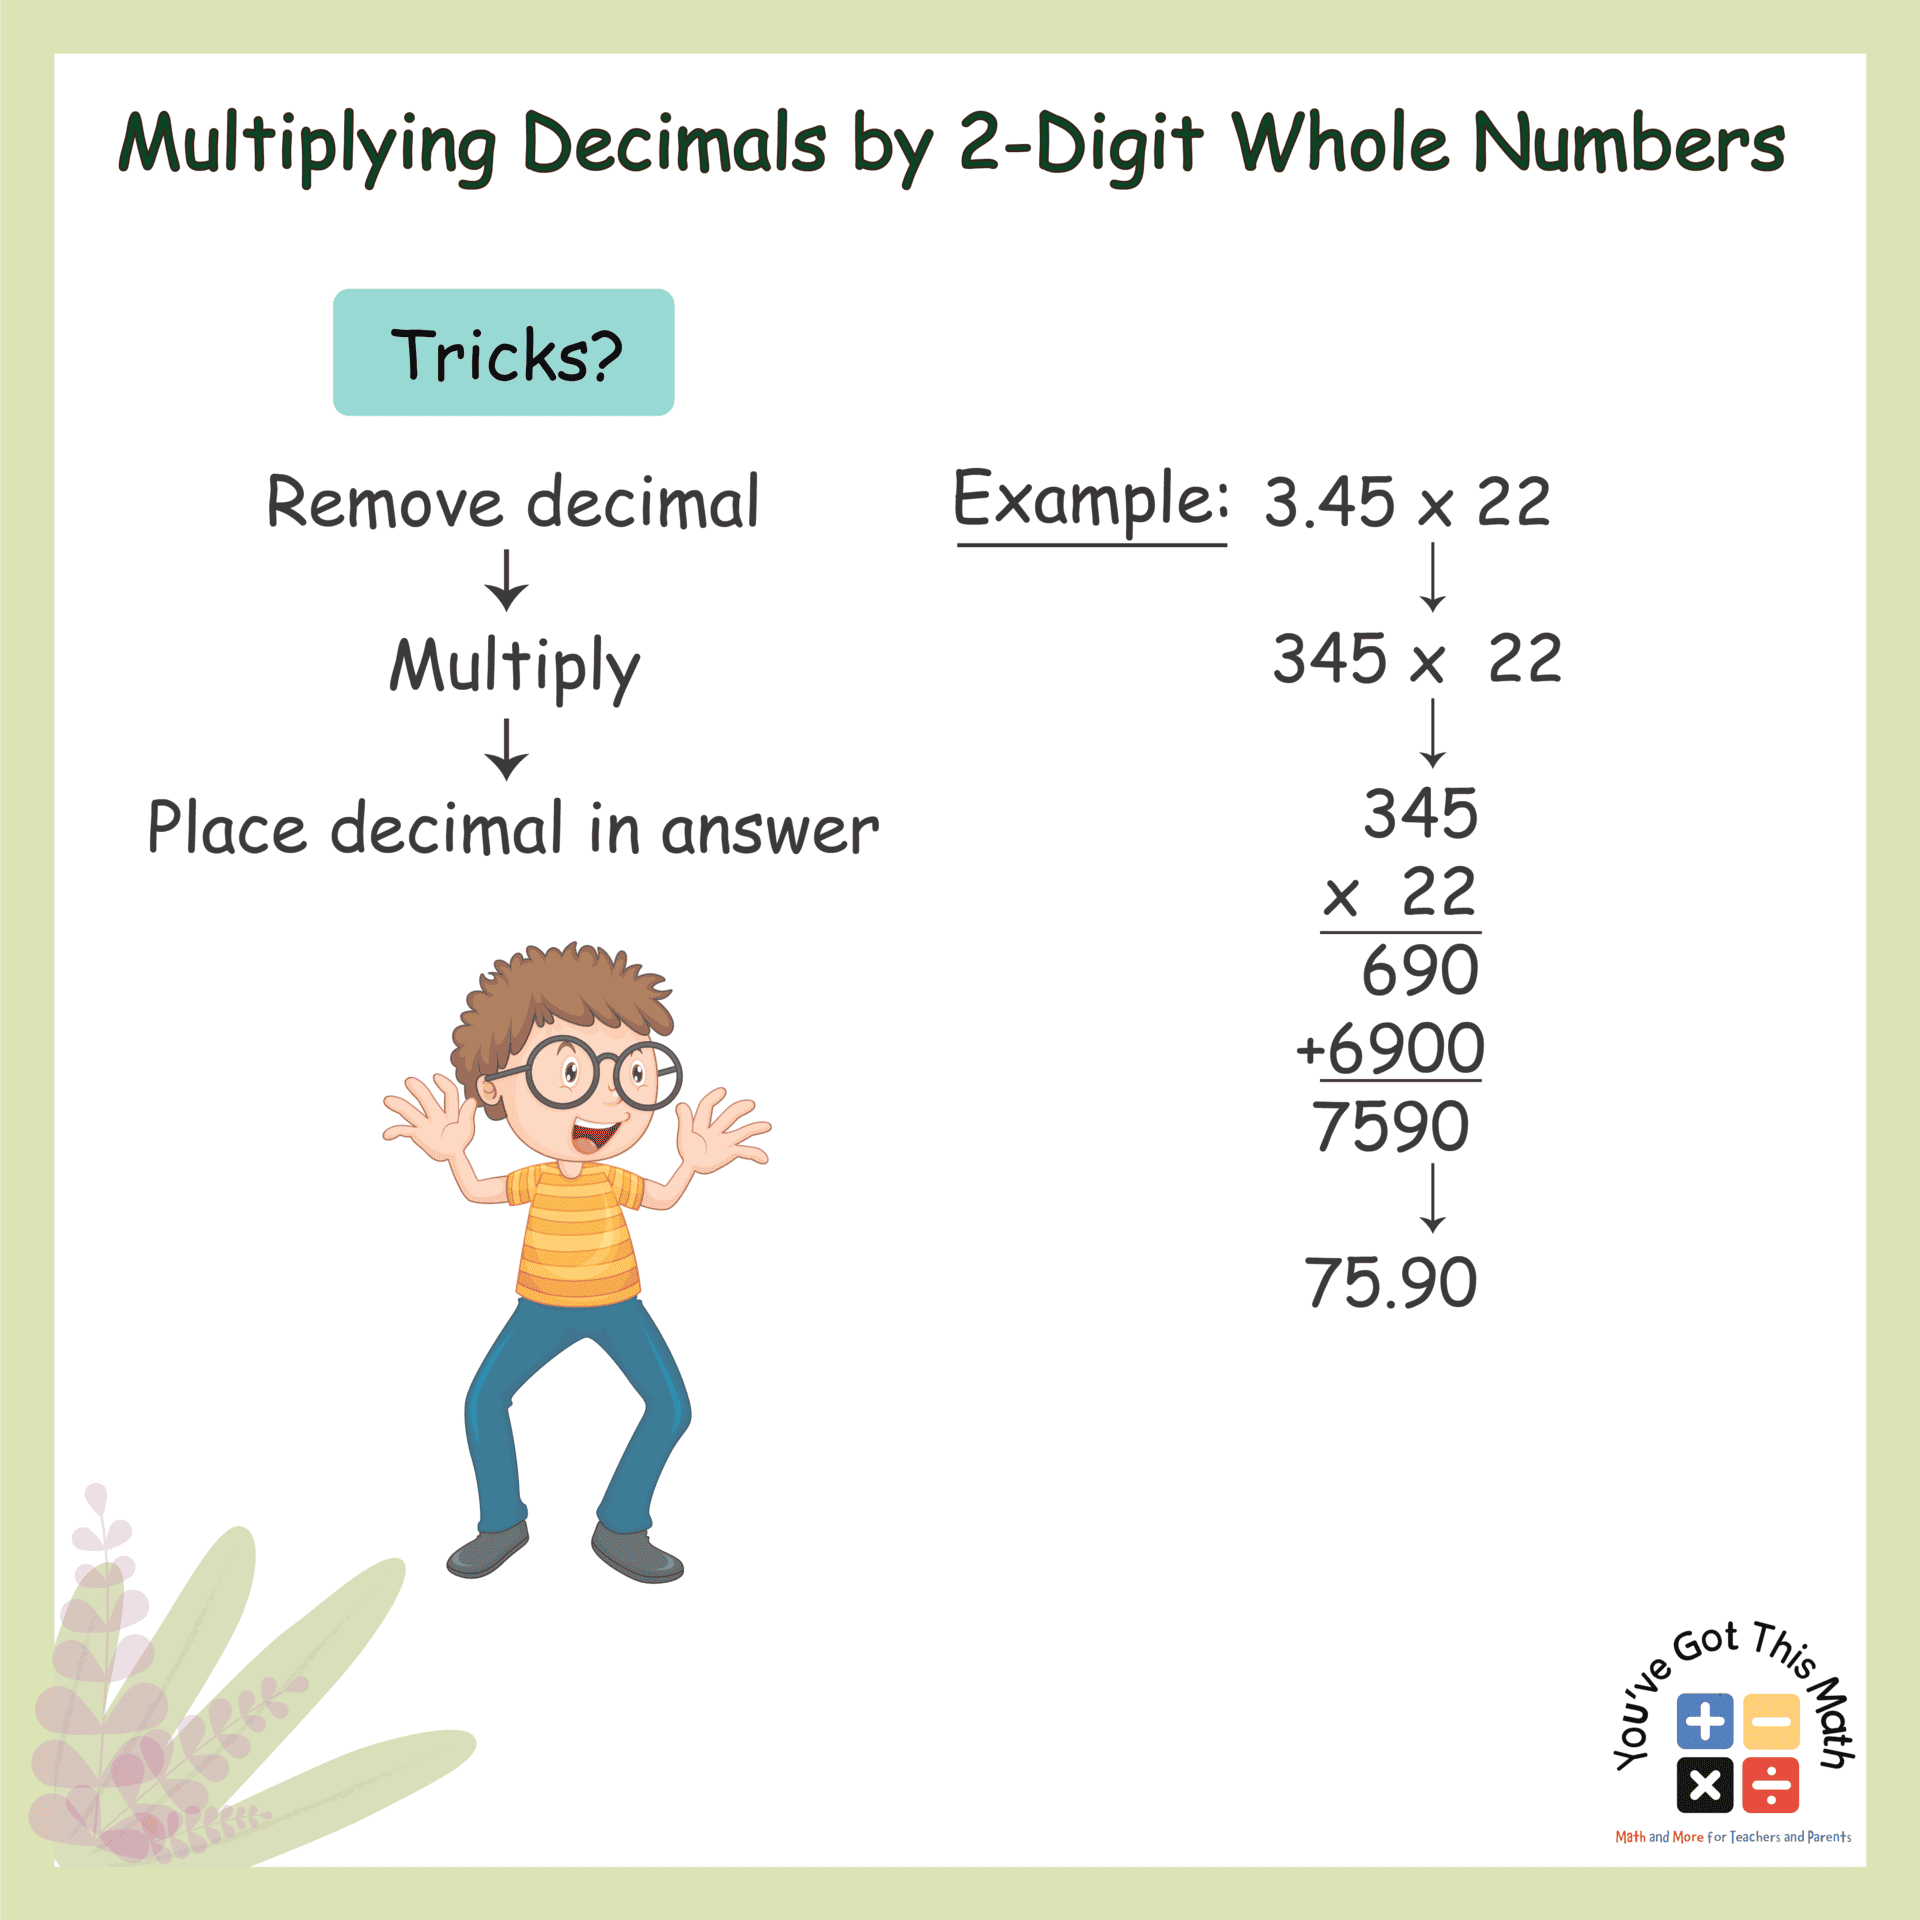 Multiplying Decimals by 2-Digit Whole Numbers2-01